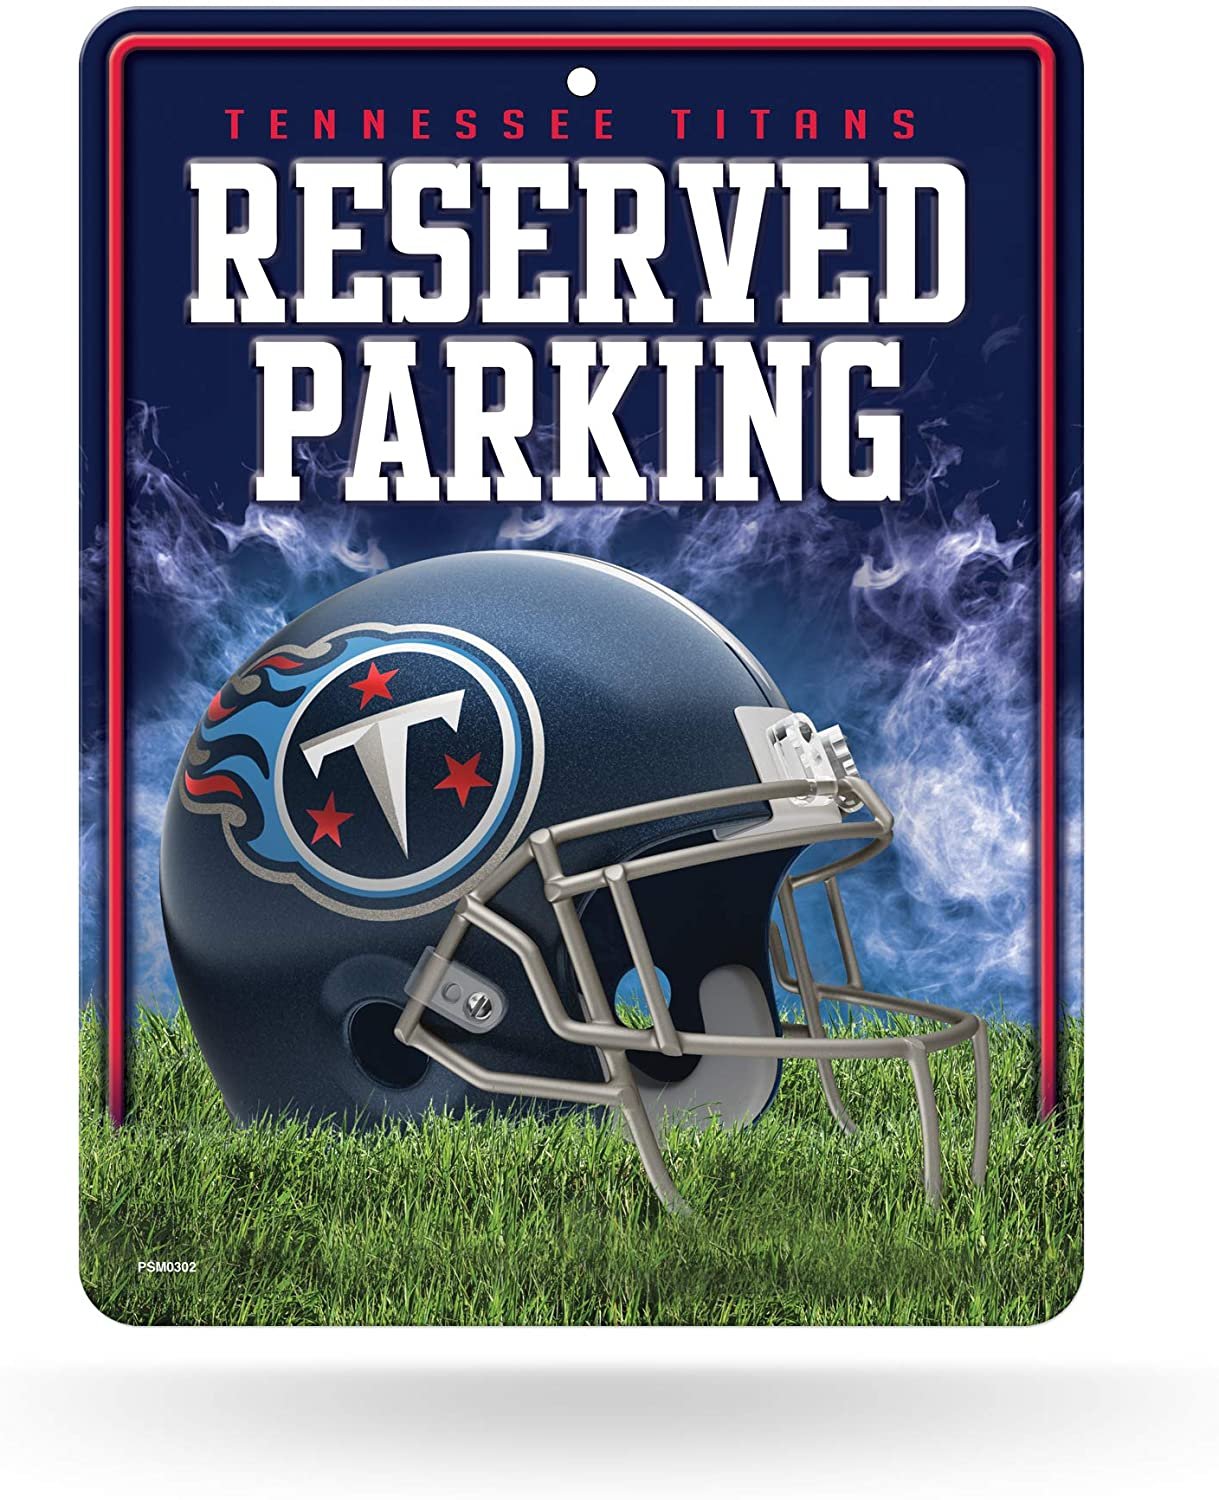 Tennessee Titans 8.5-Inch by 11-Inch Metal Parking Sign Décor